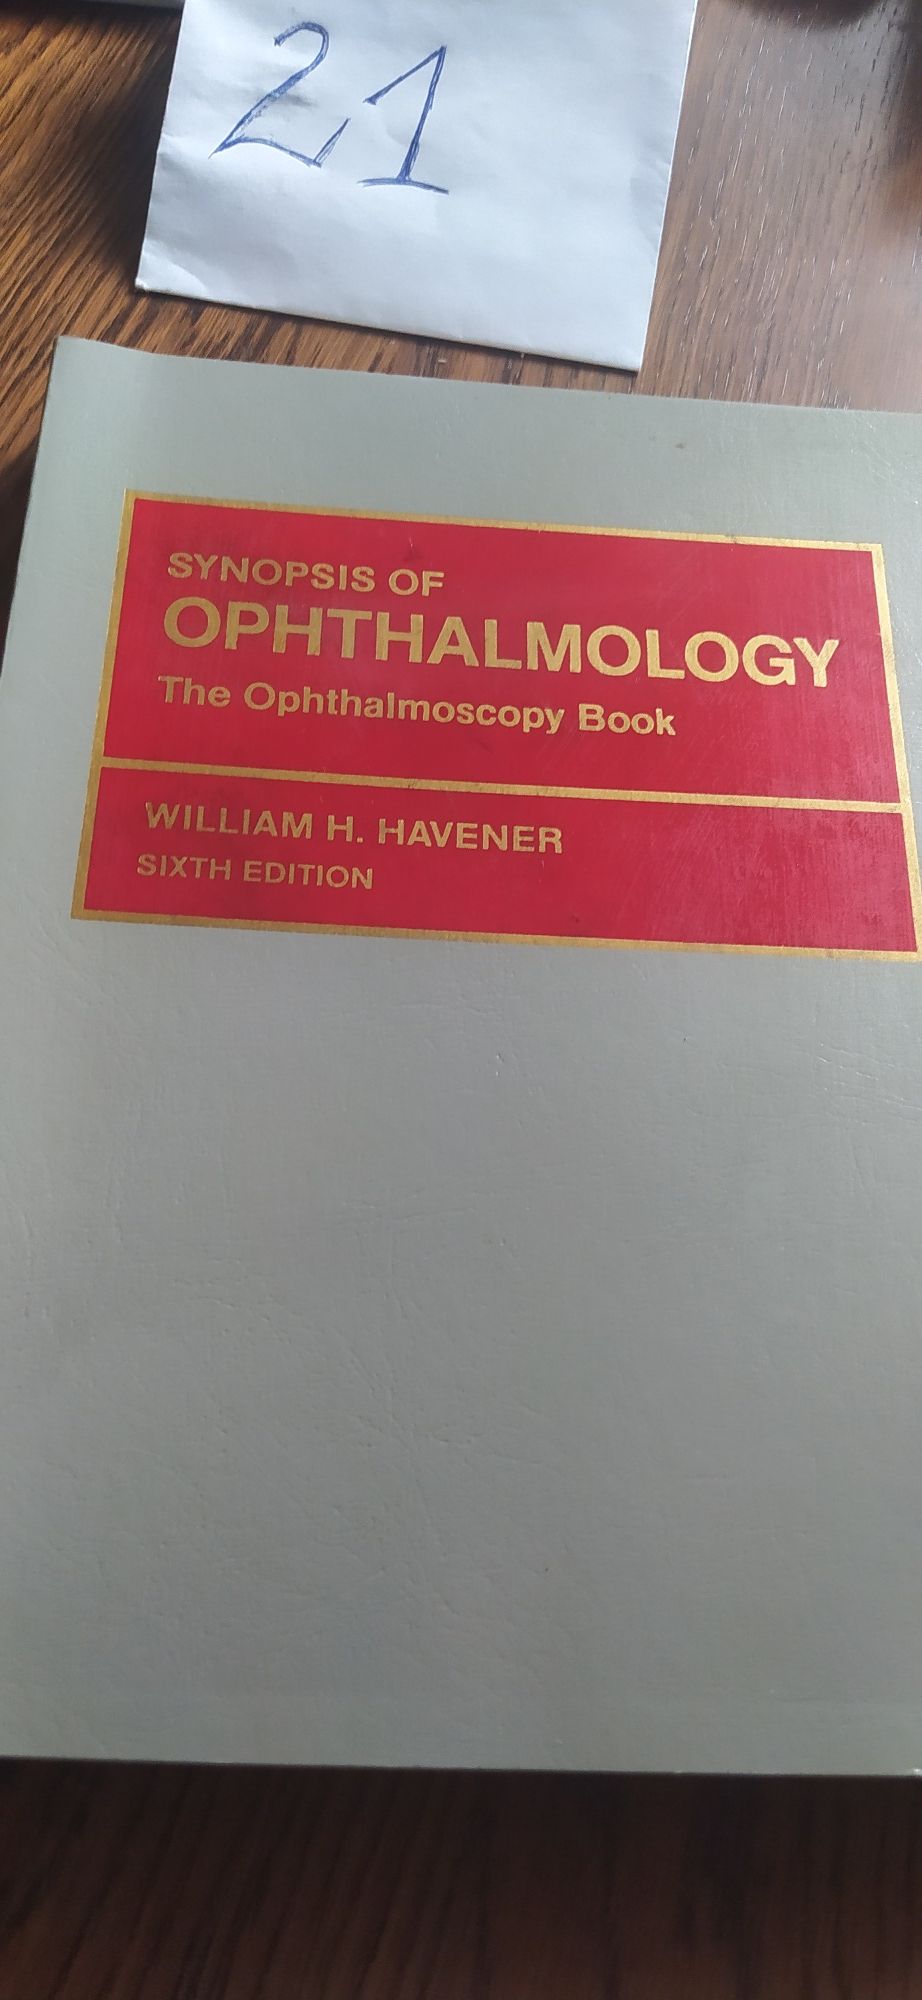 Synopsis of Ophthalmology the Ophthalmoscopy Book William H. Havener